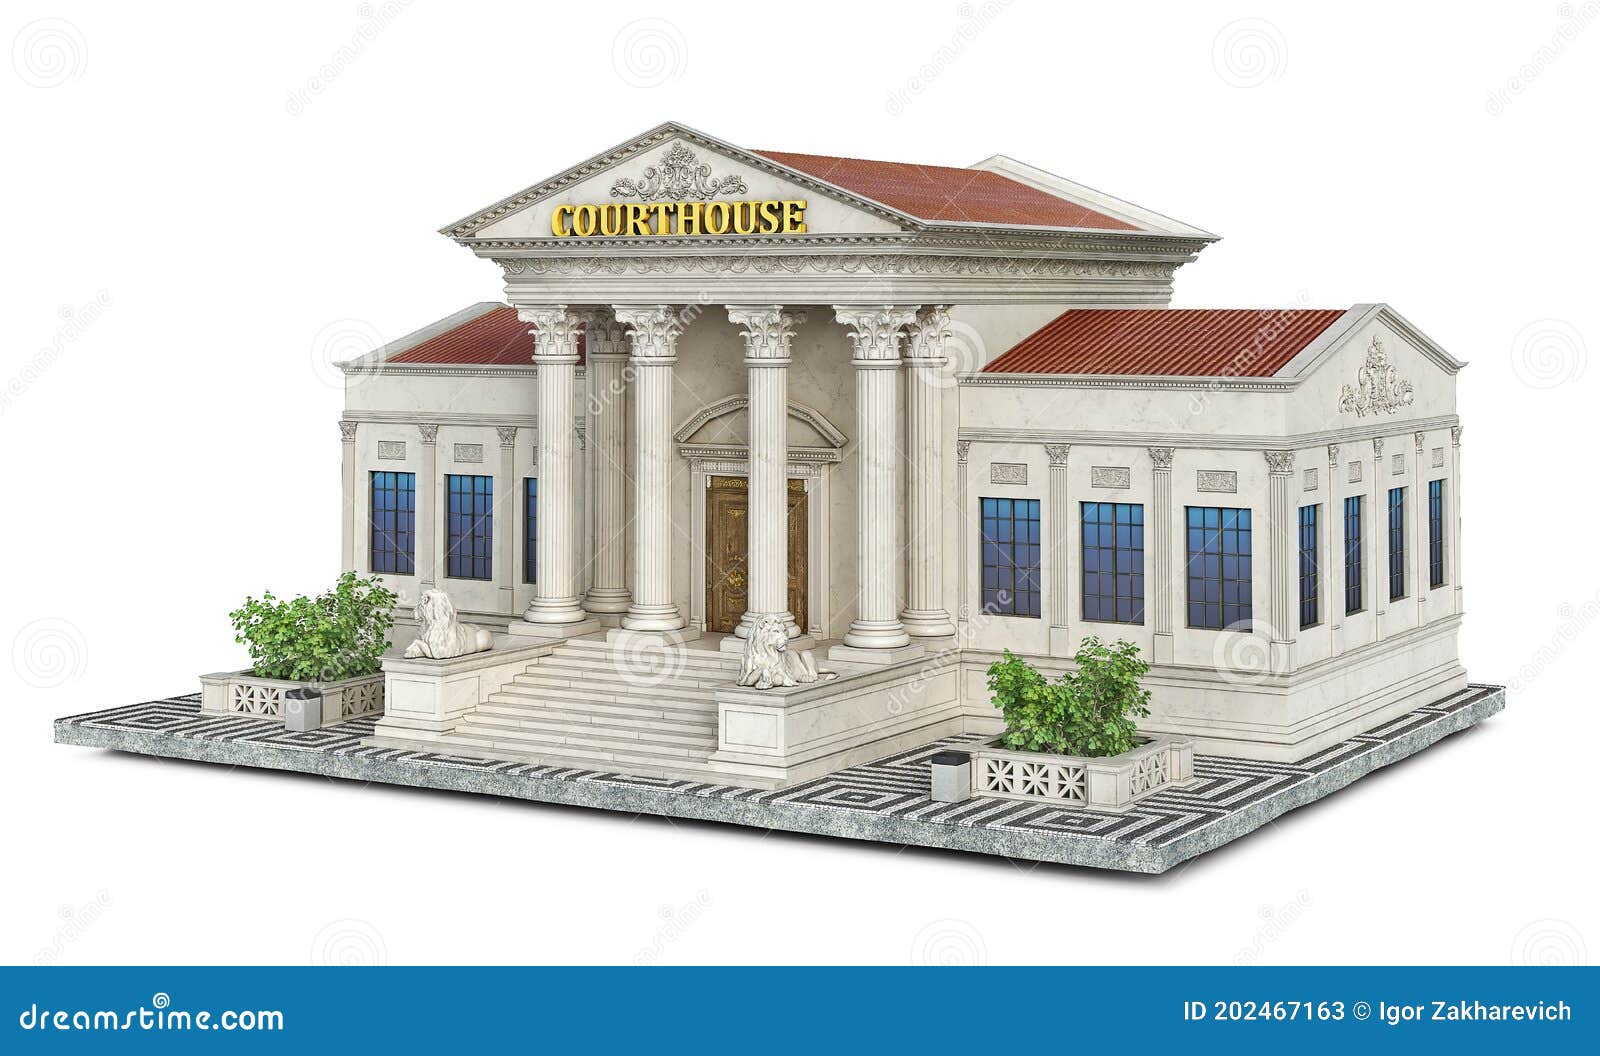 a classical building of courthouse on a piece of ground